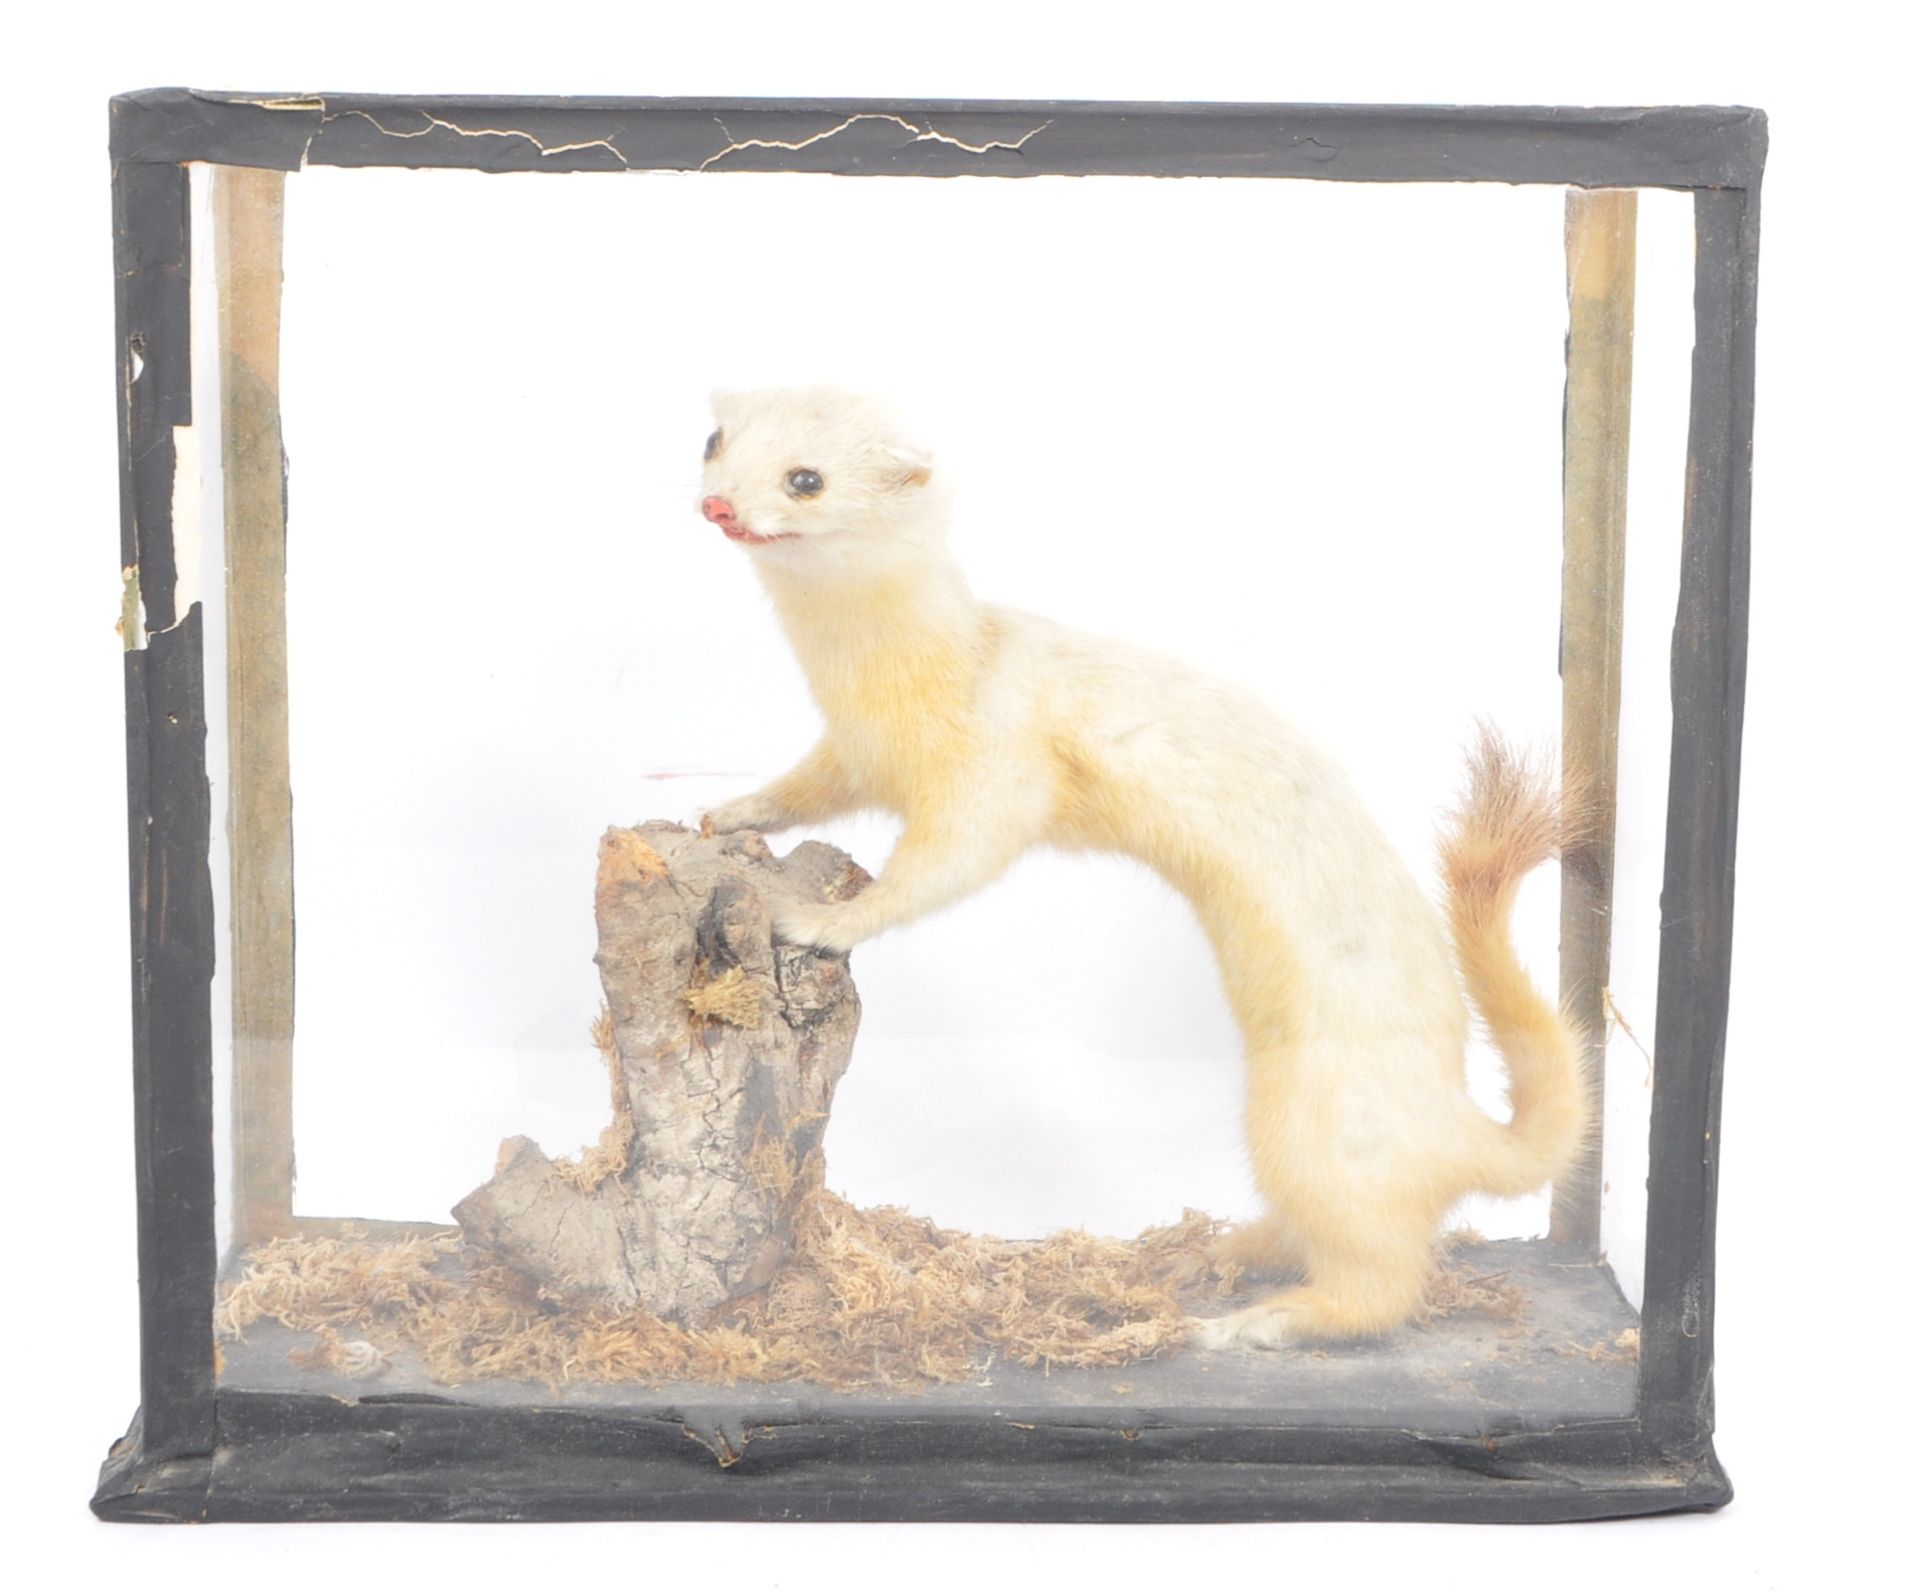 OF TAXIDERMY INTEREST - MID 20TH CENTURY STOAT / WEASEL CASED